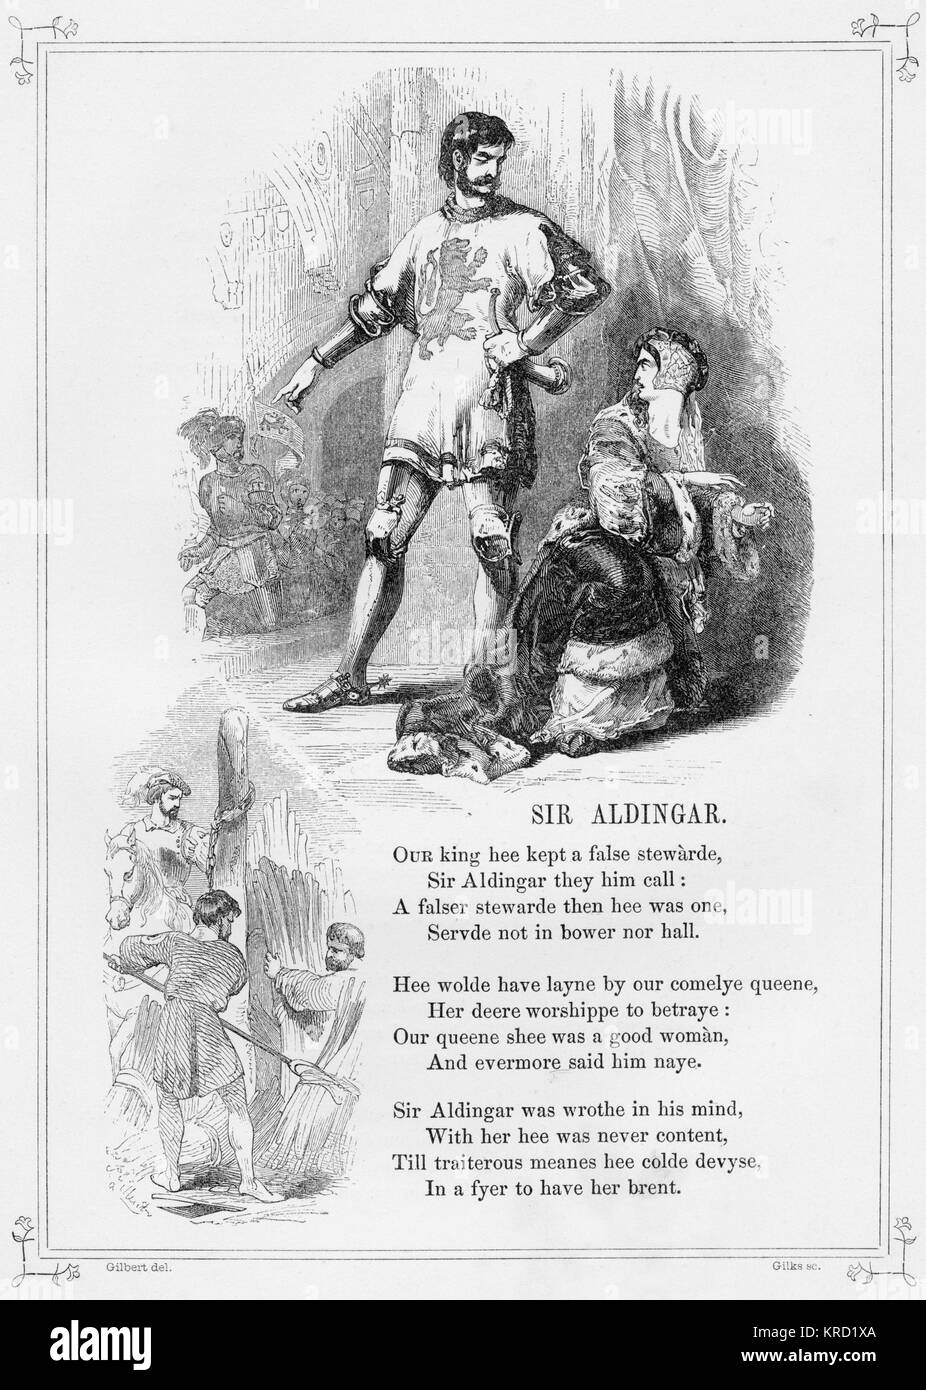 SIR ALDINGAR.  Popular British Ballad, recounting the tale of a rebuffed Sir Aldingar who slanders his mistress (the Queen) by placing a leper in her bed for the King to find.  A mysterious small child saves the day when he fights Sir Aldingar and mortally wounds him.  The knight calls for a priest and a confession follows     Date: 1853 Stock Photo